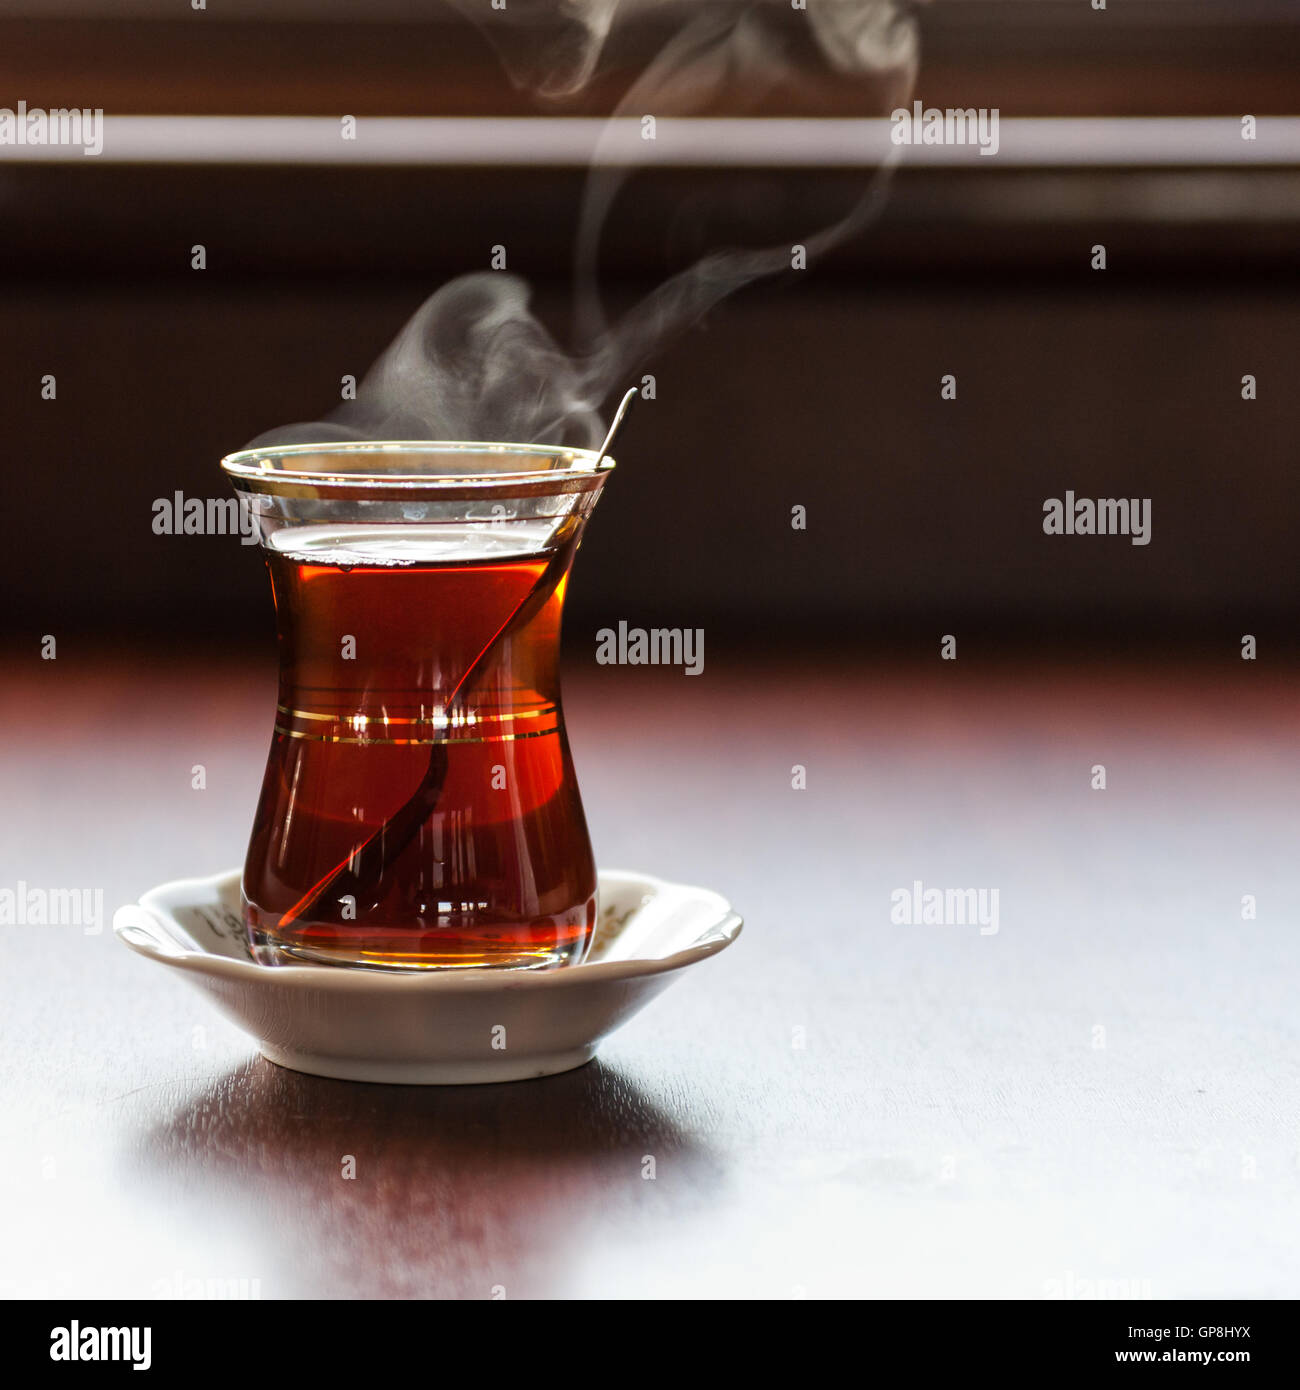 https://c8.alamy.com/comp/GP8HYX/cup-of-turkish-tea-on-a-table-with-steam-above-GP8HYX.jpg